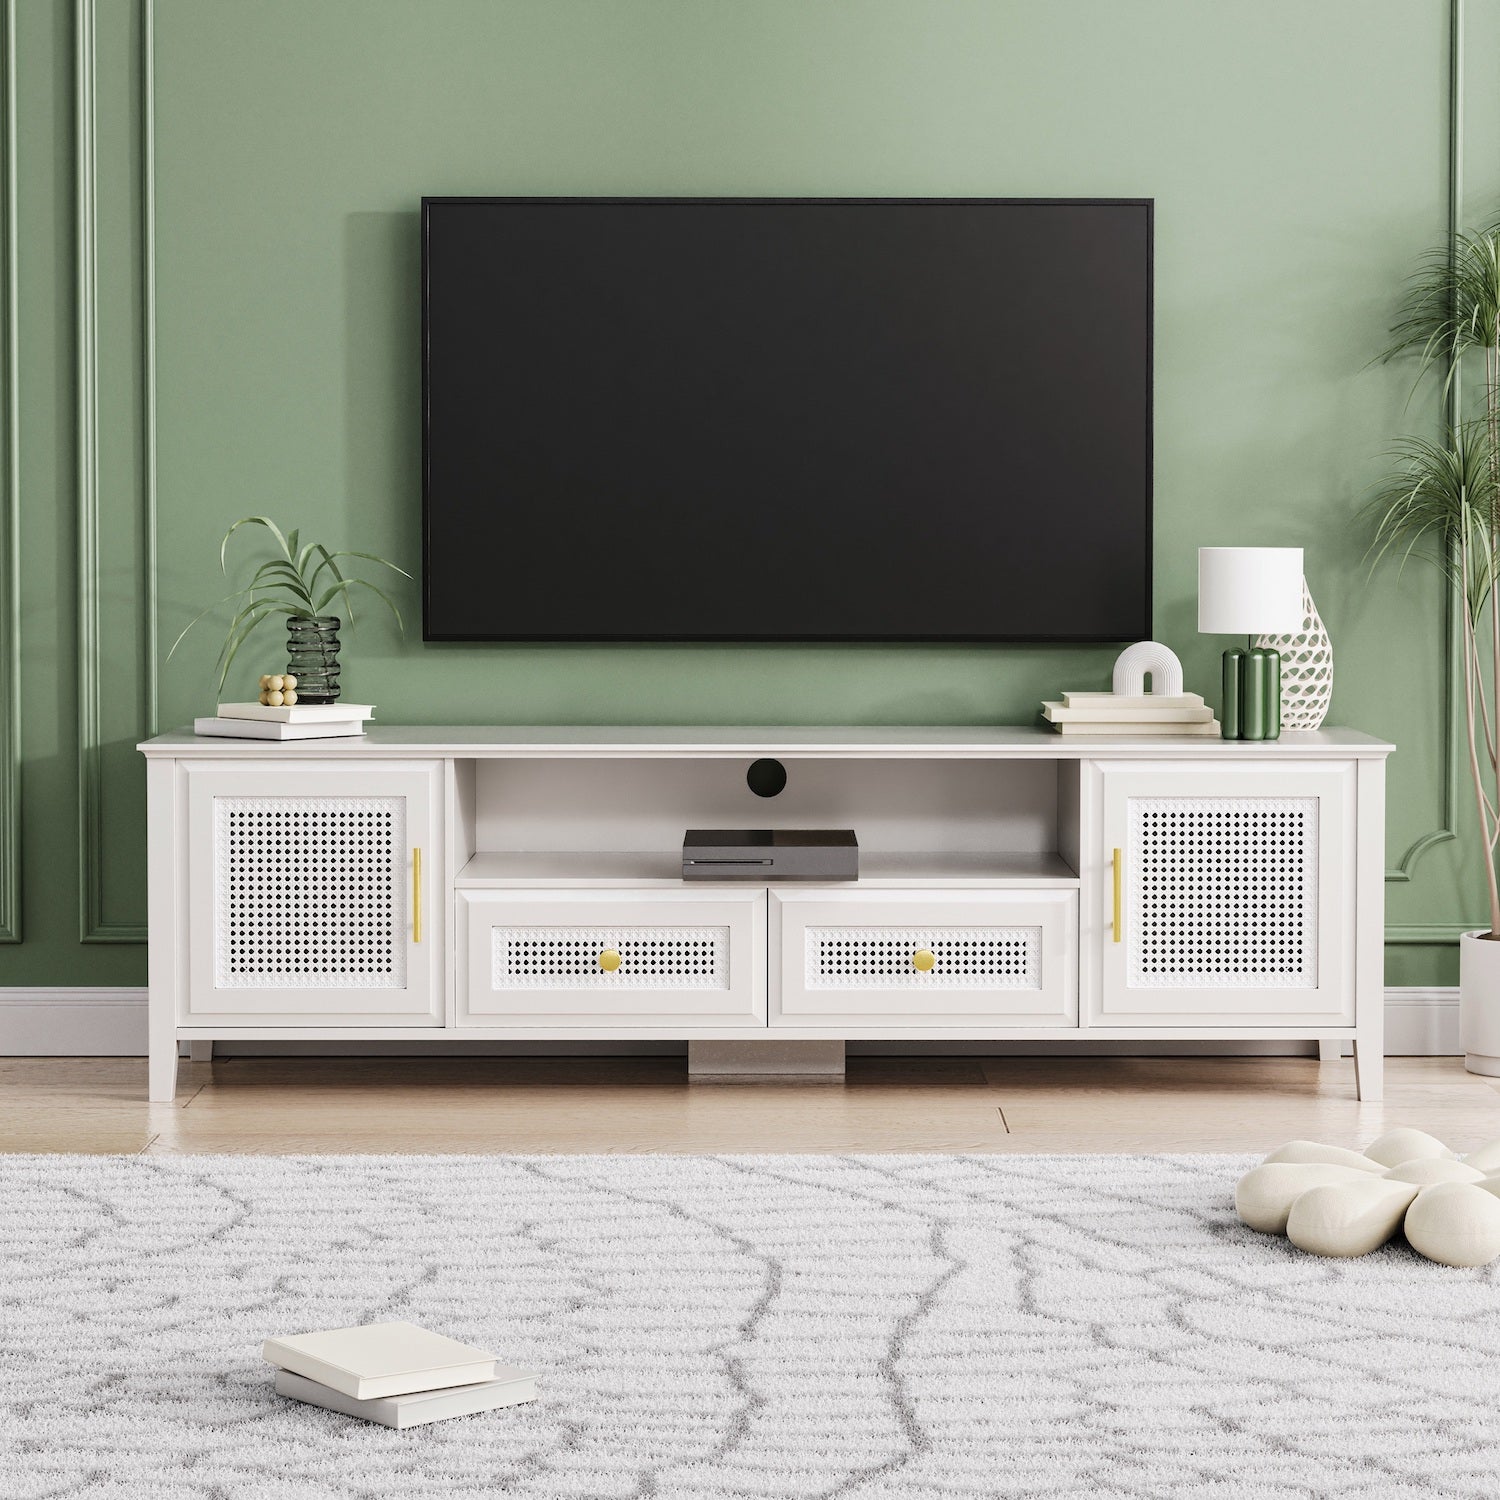 On-Trend Boho Style TV Stand with Rattan Doors - White